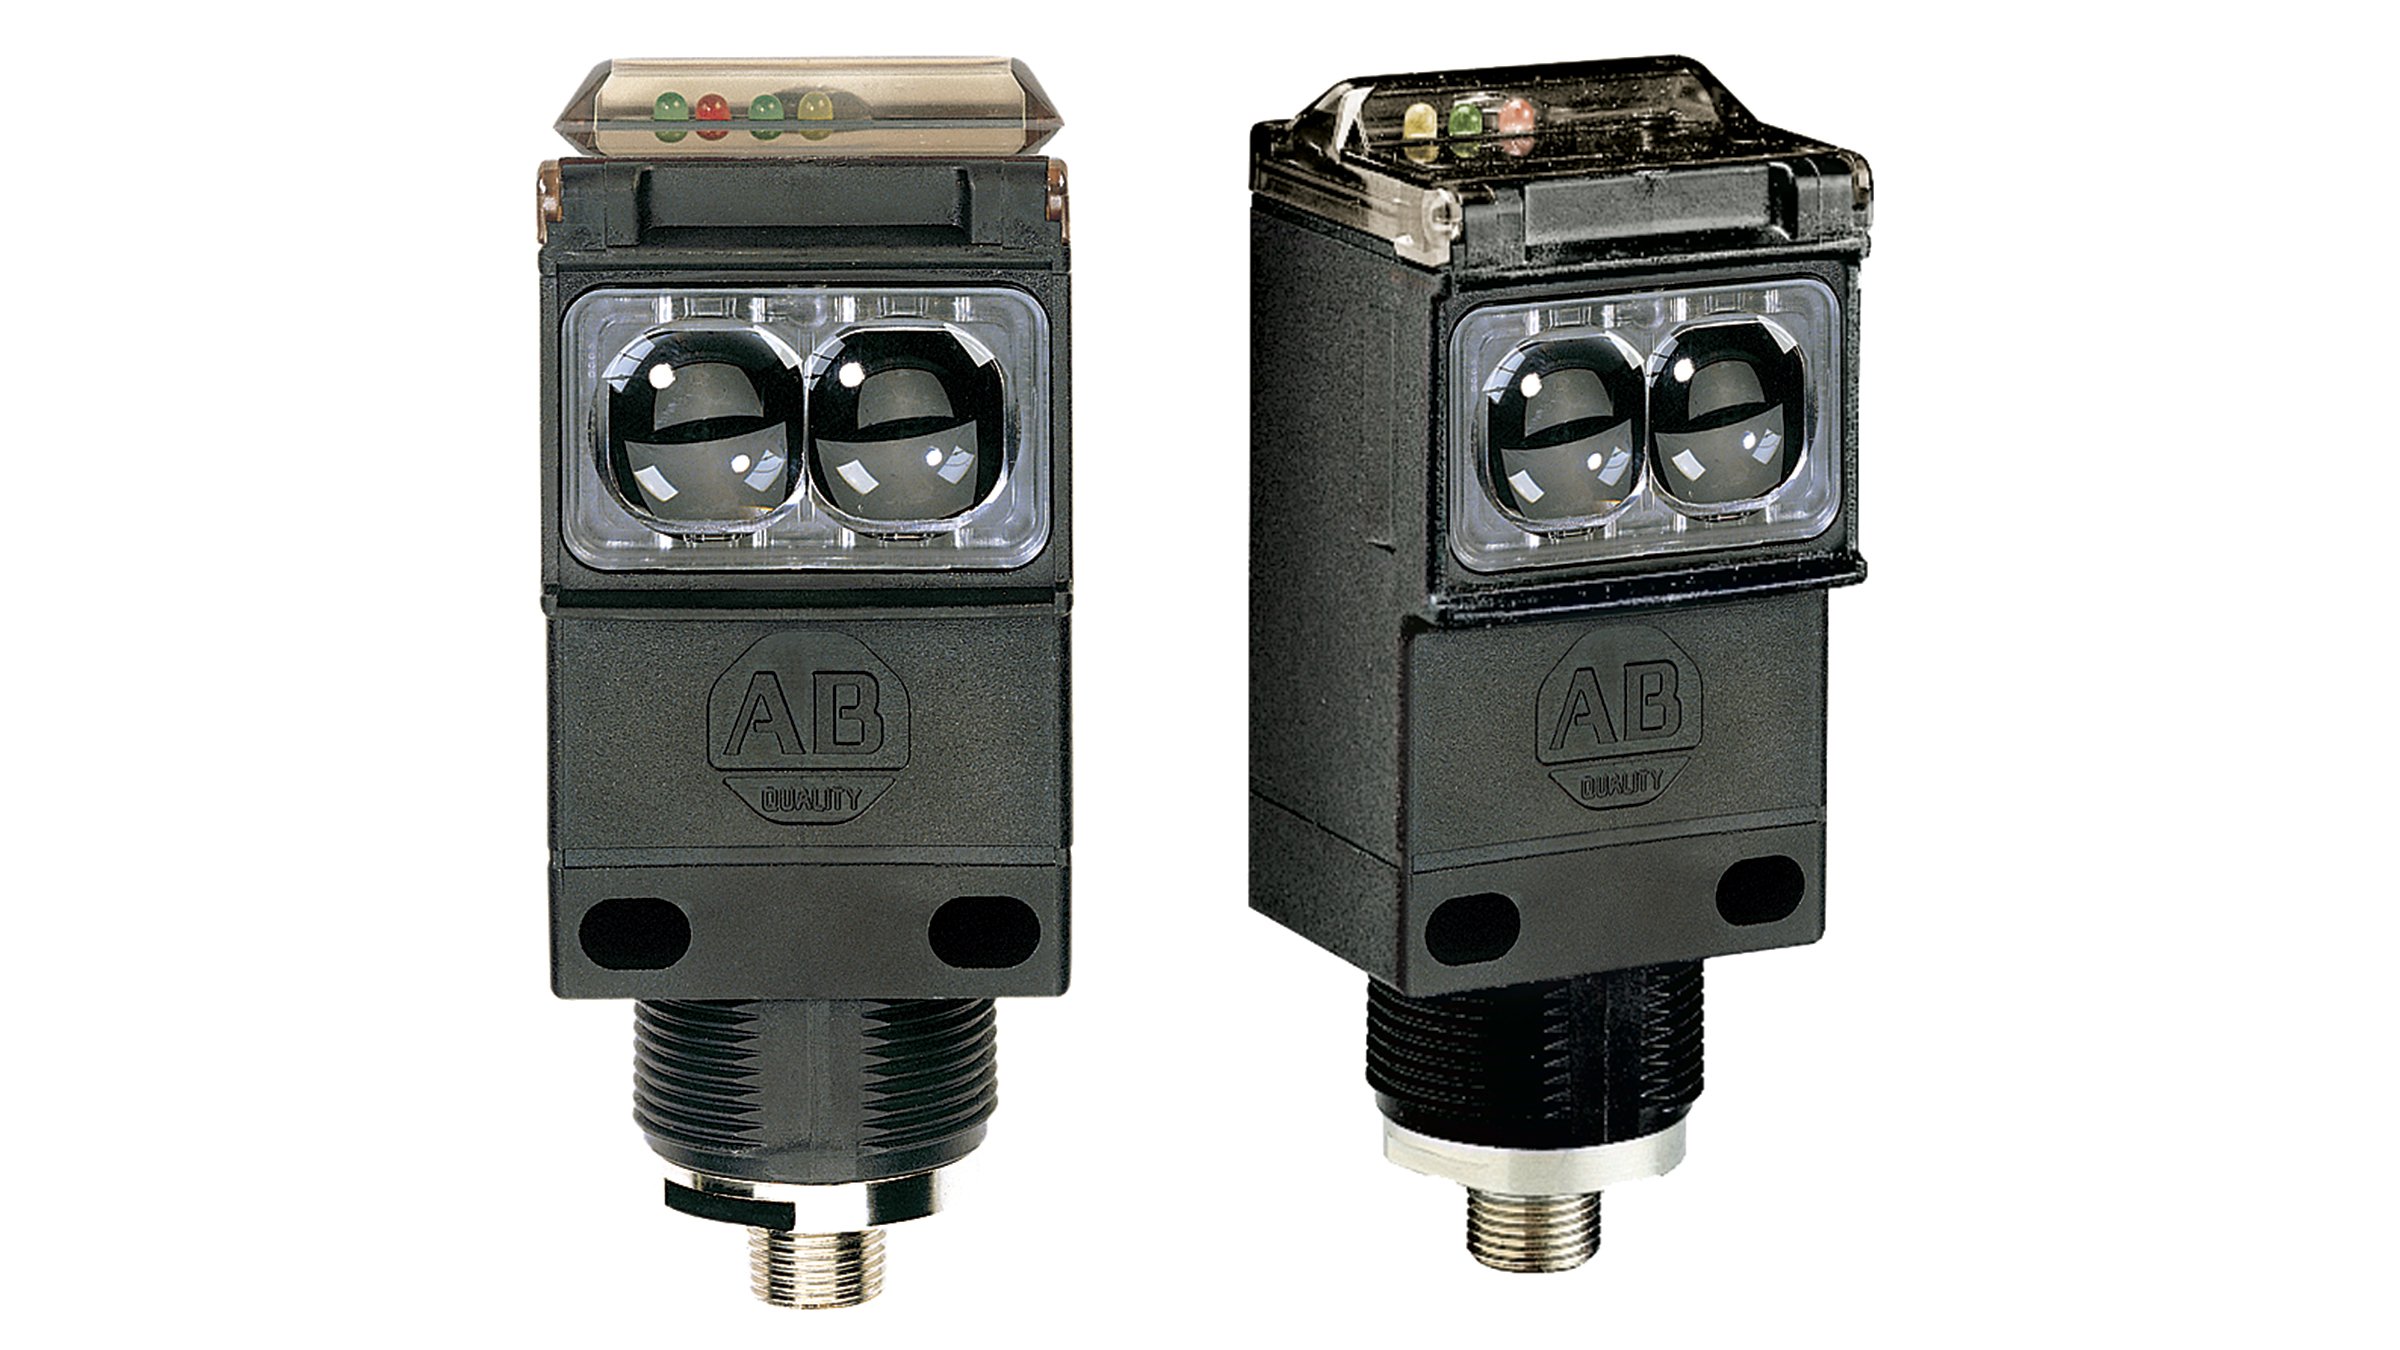 2 black, rectangular sensors with circular sensor faces on the side, static LED indication on top and stainless-steel threading on the bottom